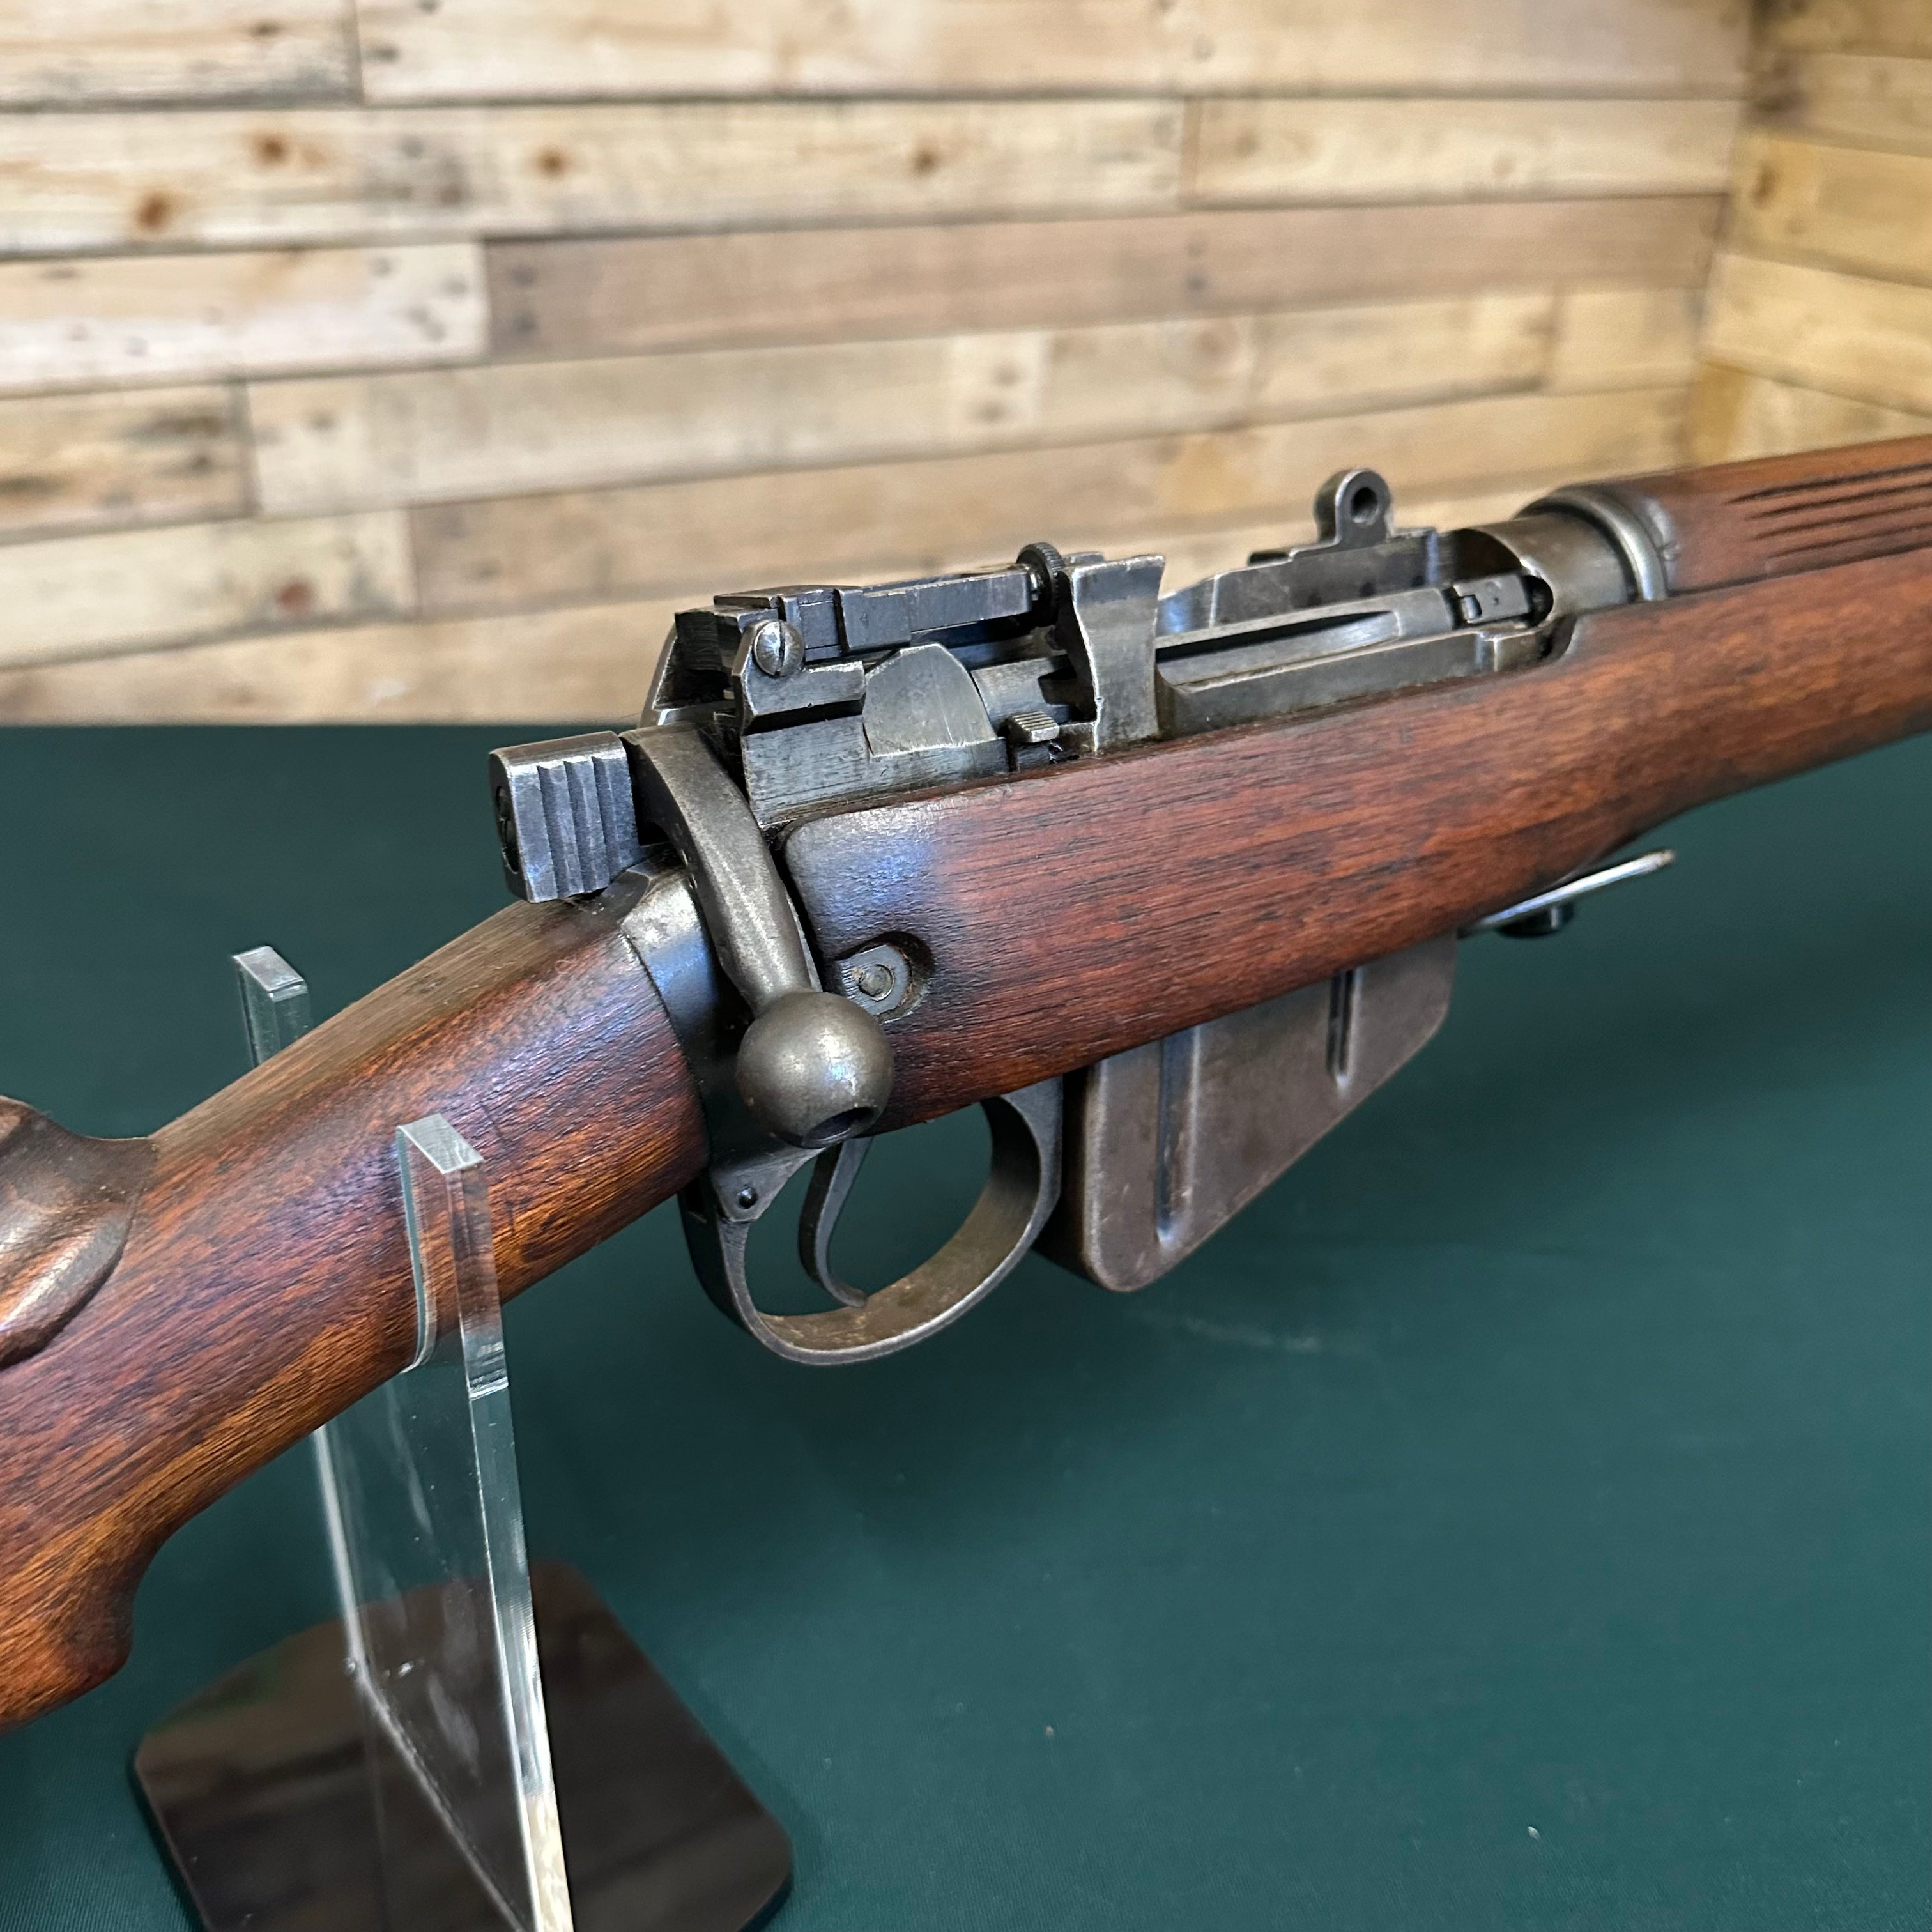 1944 BSA Lee Enfield No.4 Mk1T Sniper Rifle with a No.32 MkII scope - SOLD